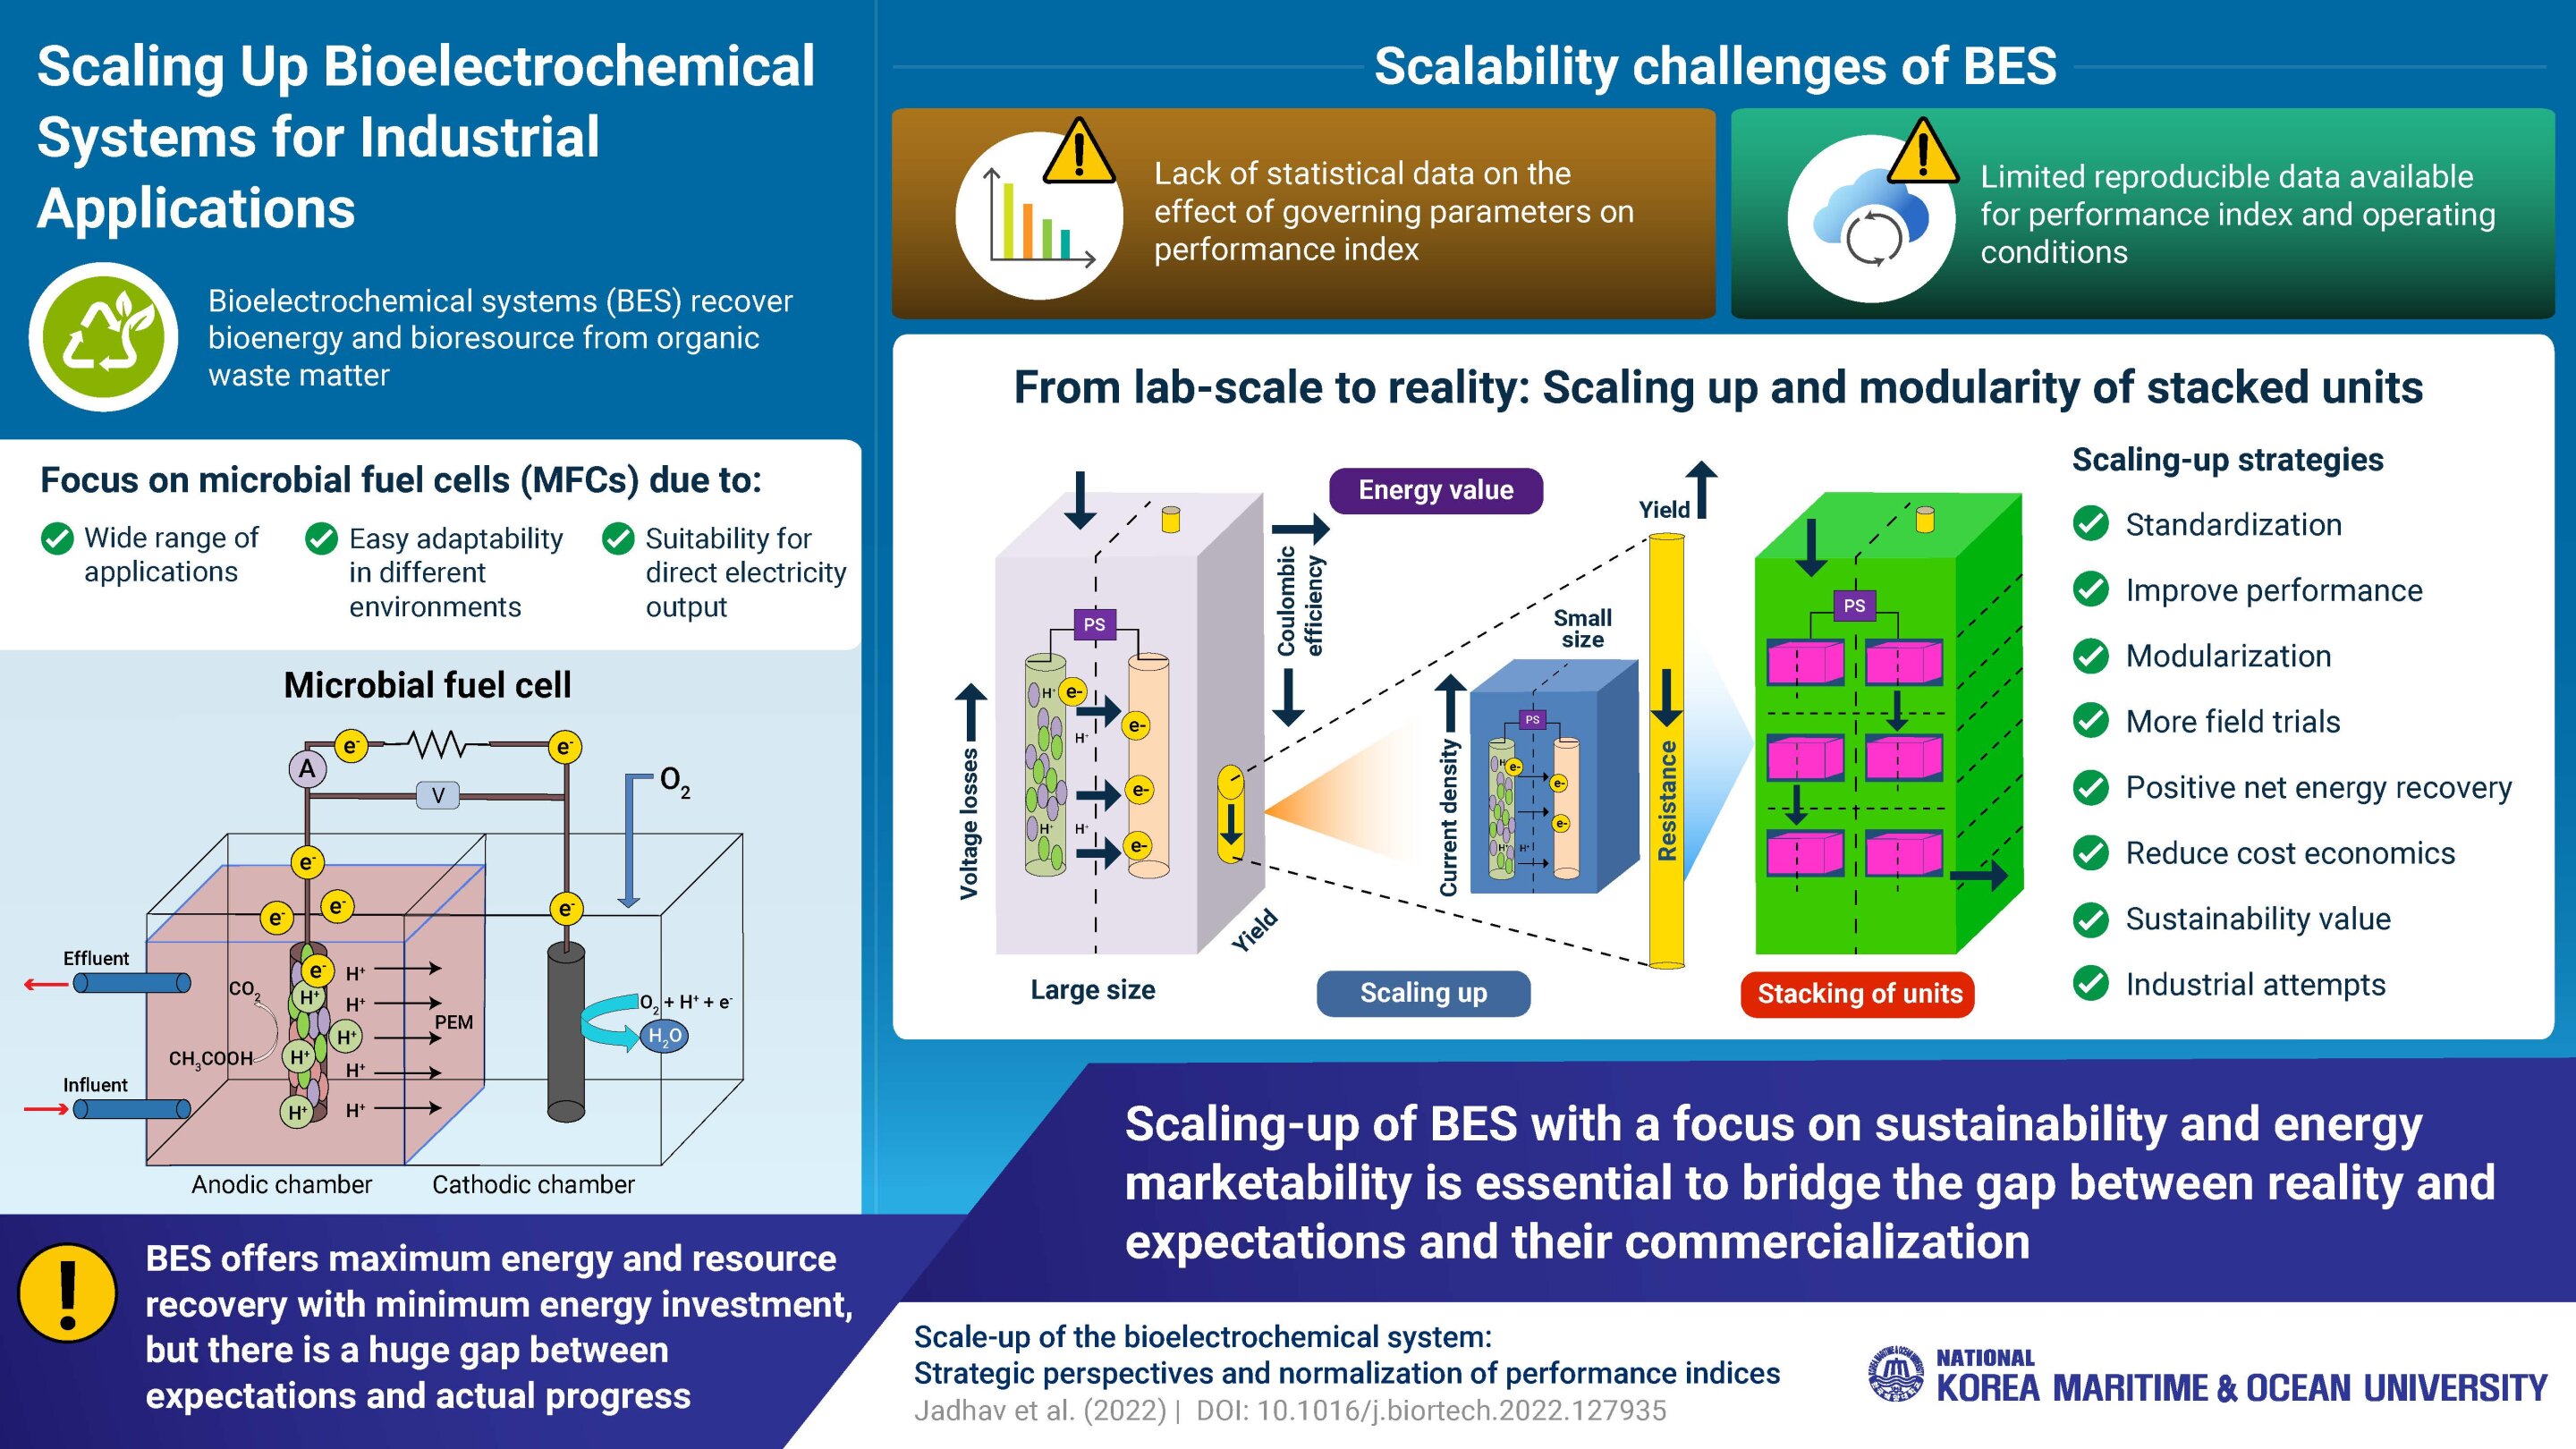 #Researchers lay out strategies for up-scaling of bioelectrochemical systems